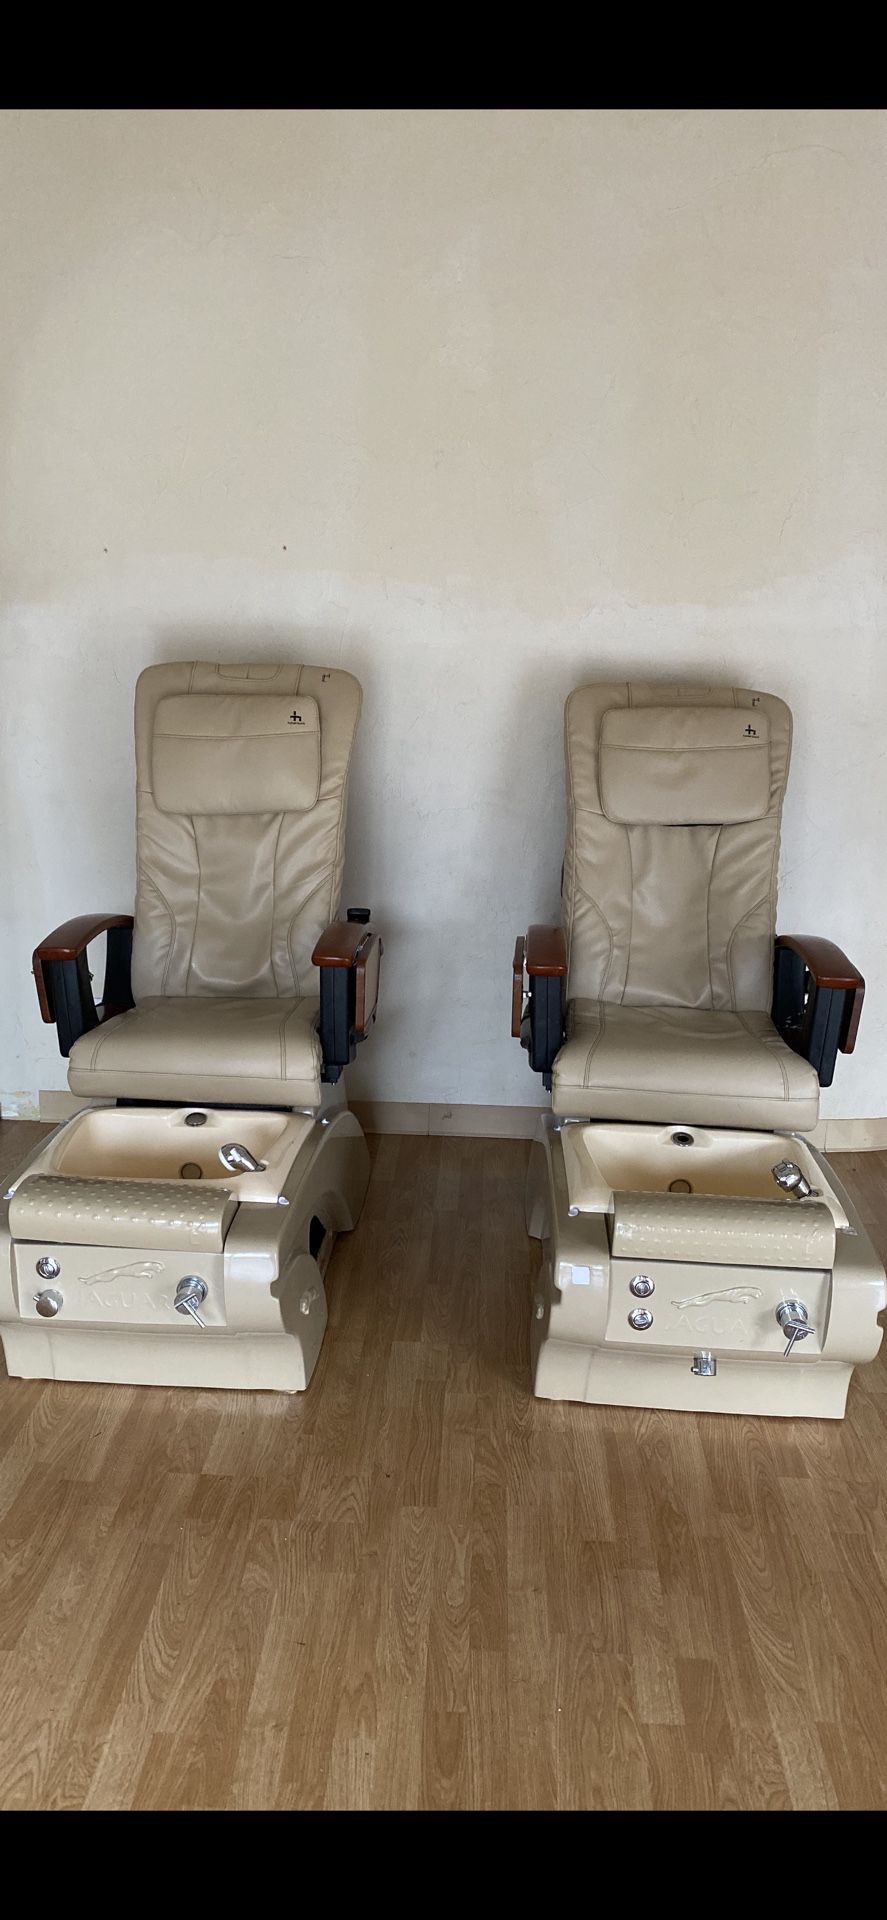 4 spa chairs available!!! In great condition